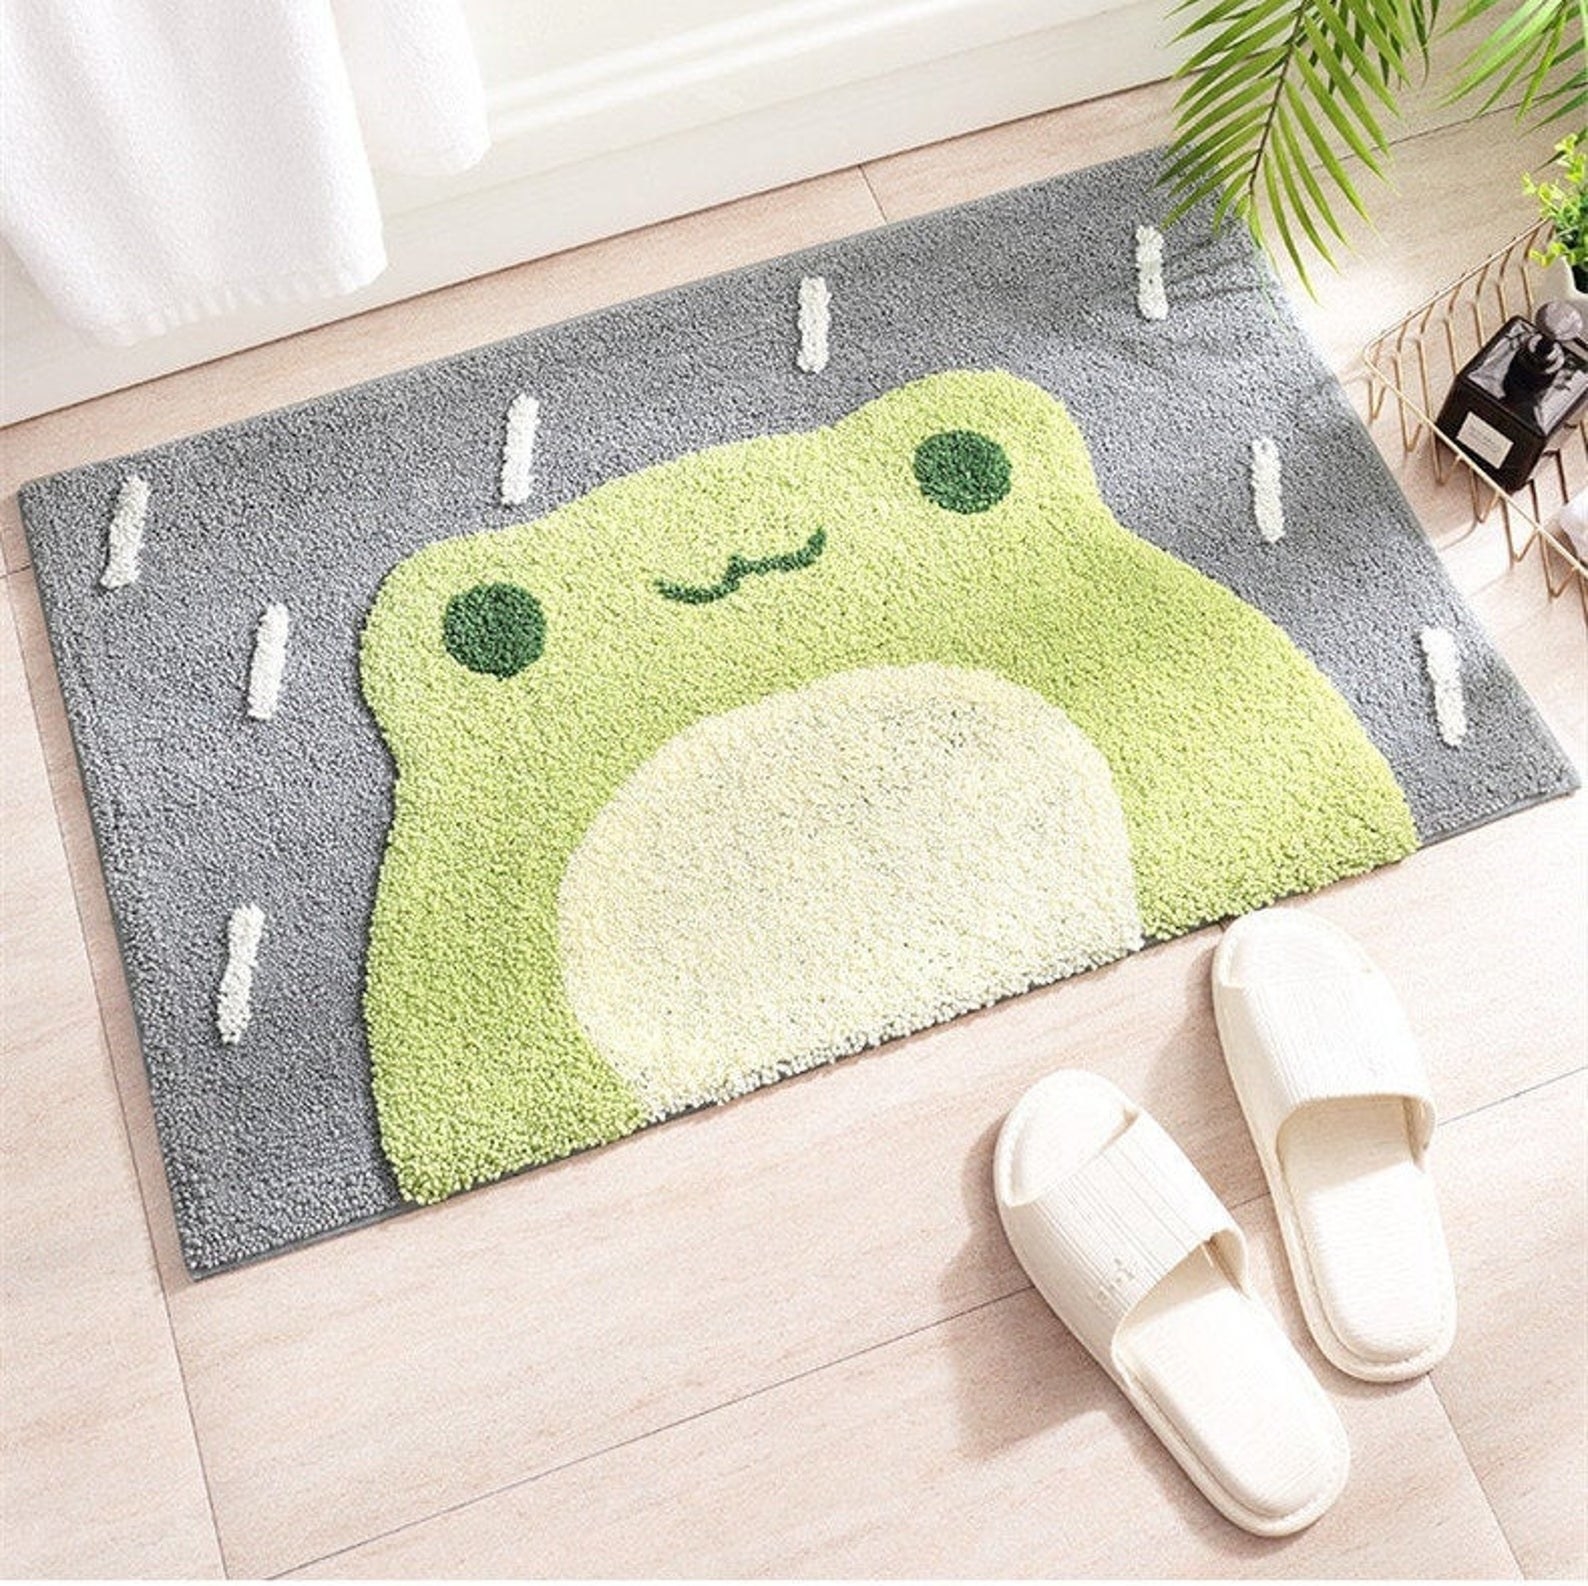 the green and gray frog doormat